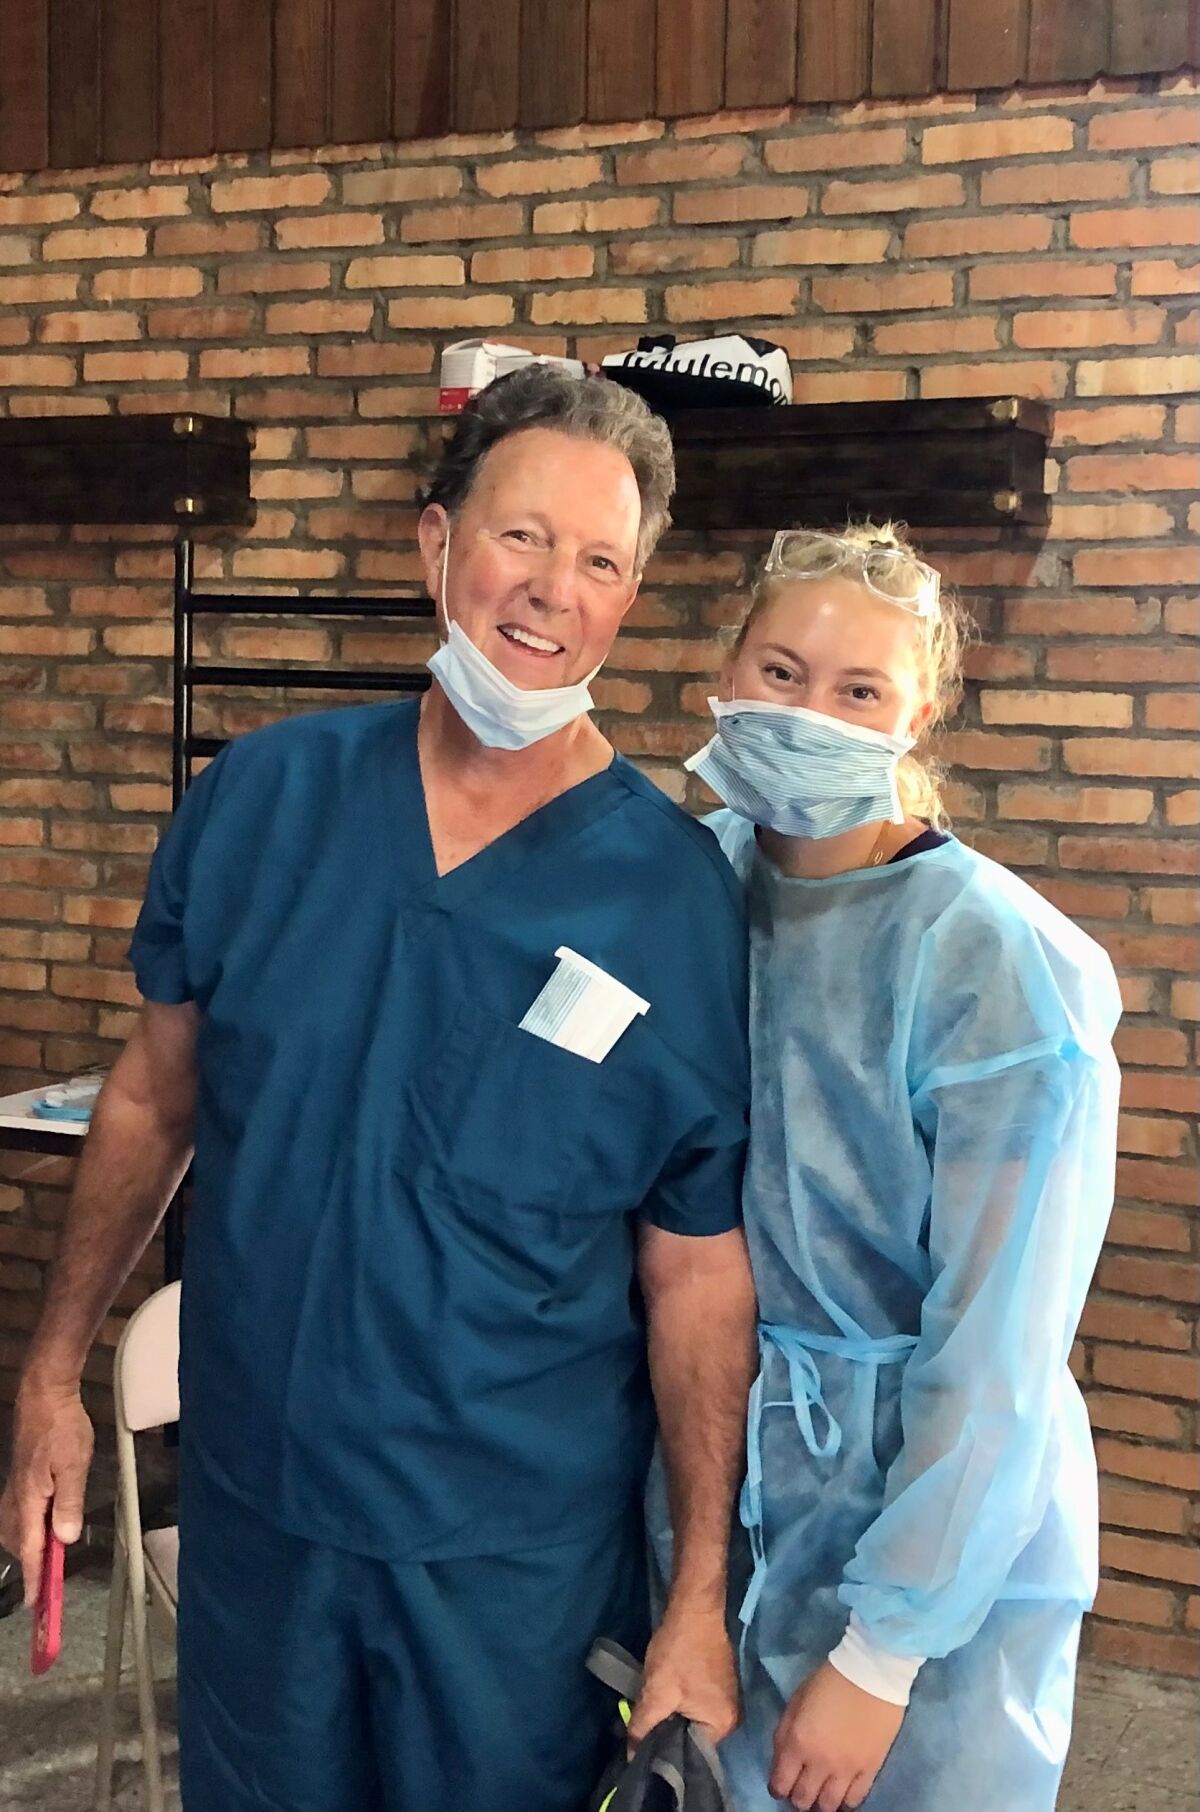 Peter and Paige Nordland were part of a team that treated 850 patients while on a mission trip to Honduras in September.